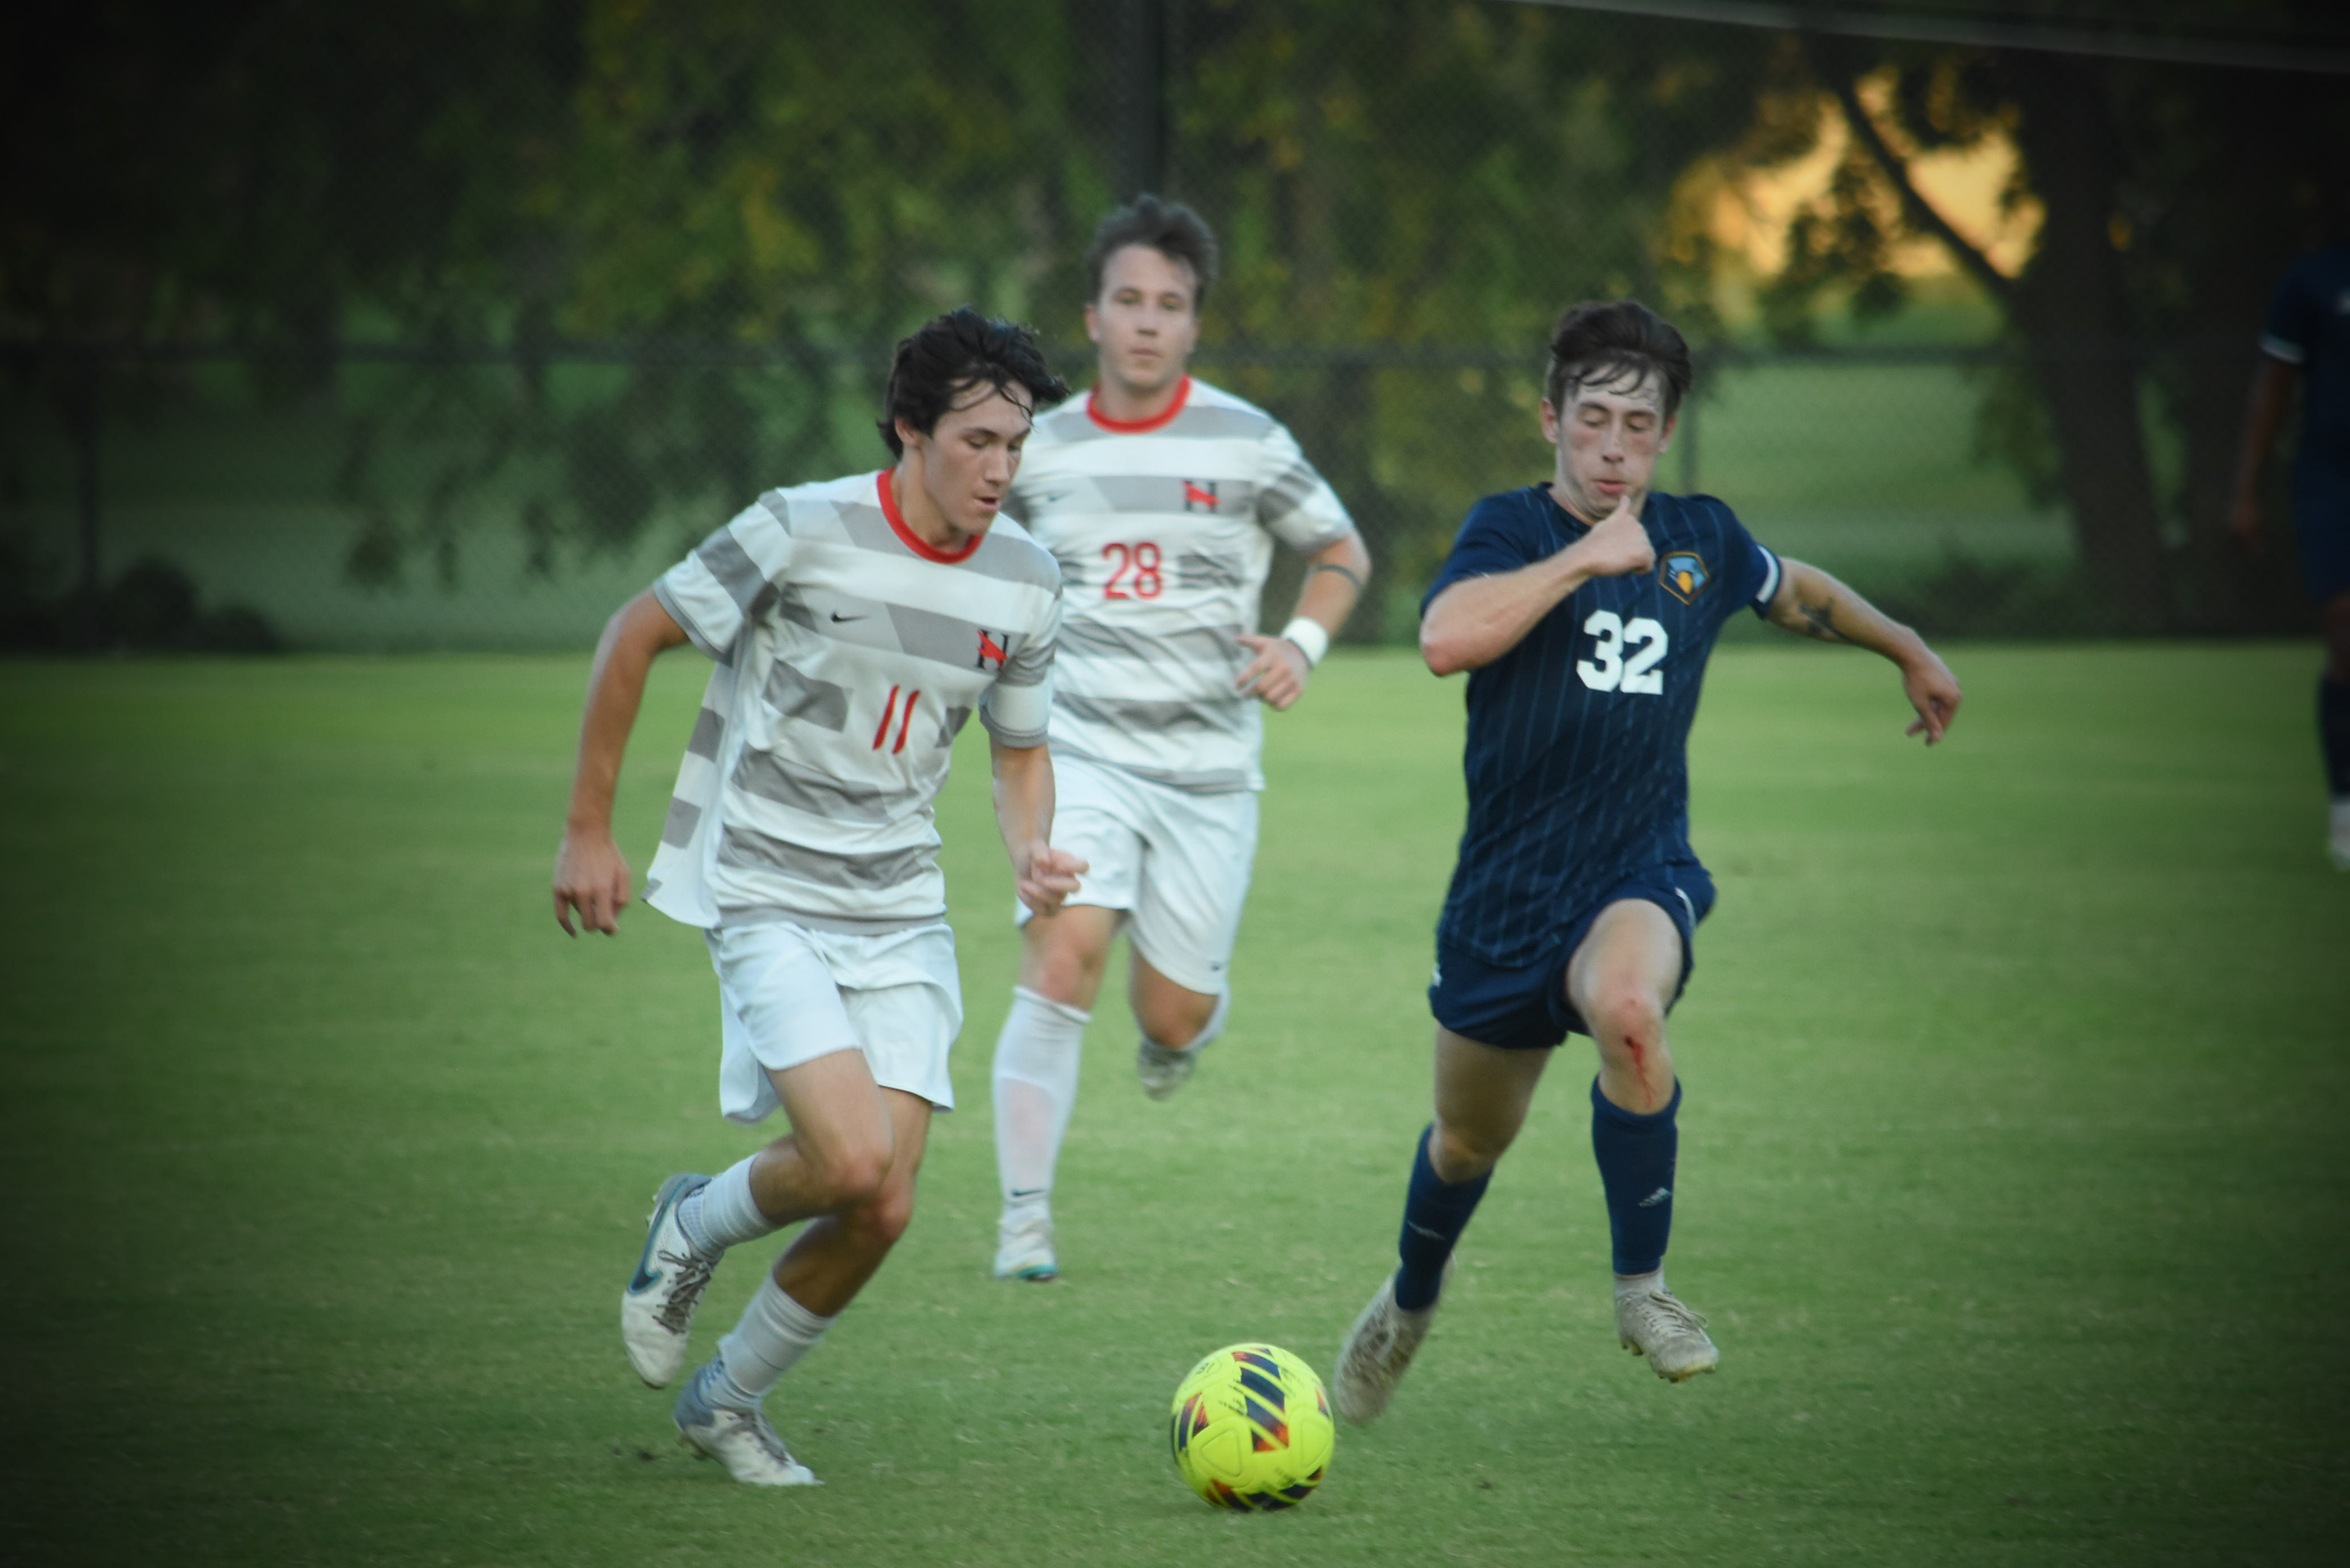 Men’s Soccer Downed by Sul Ross State